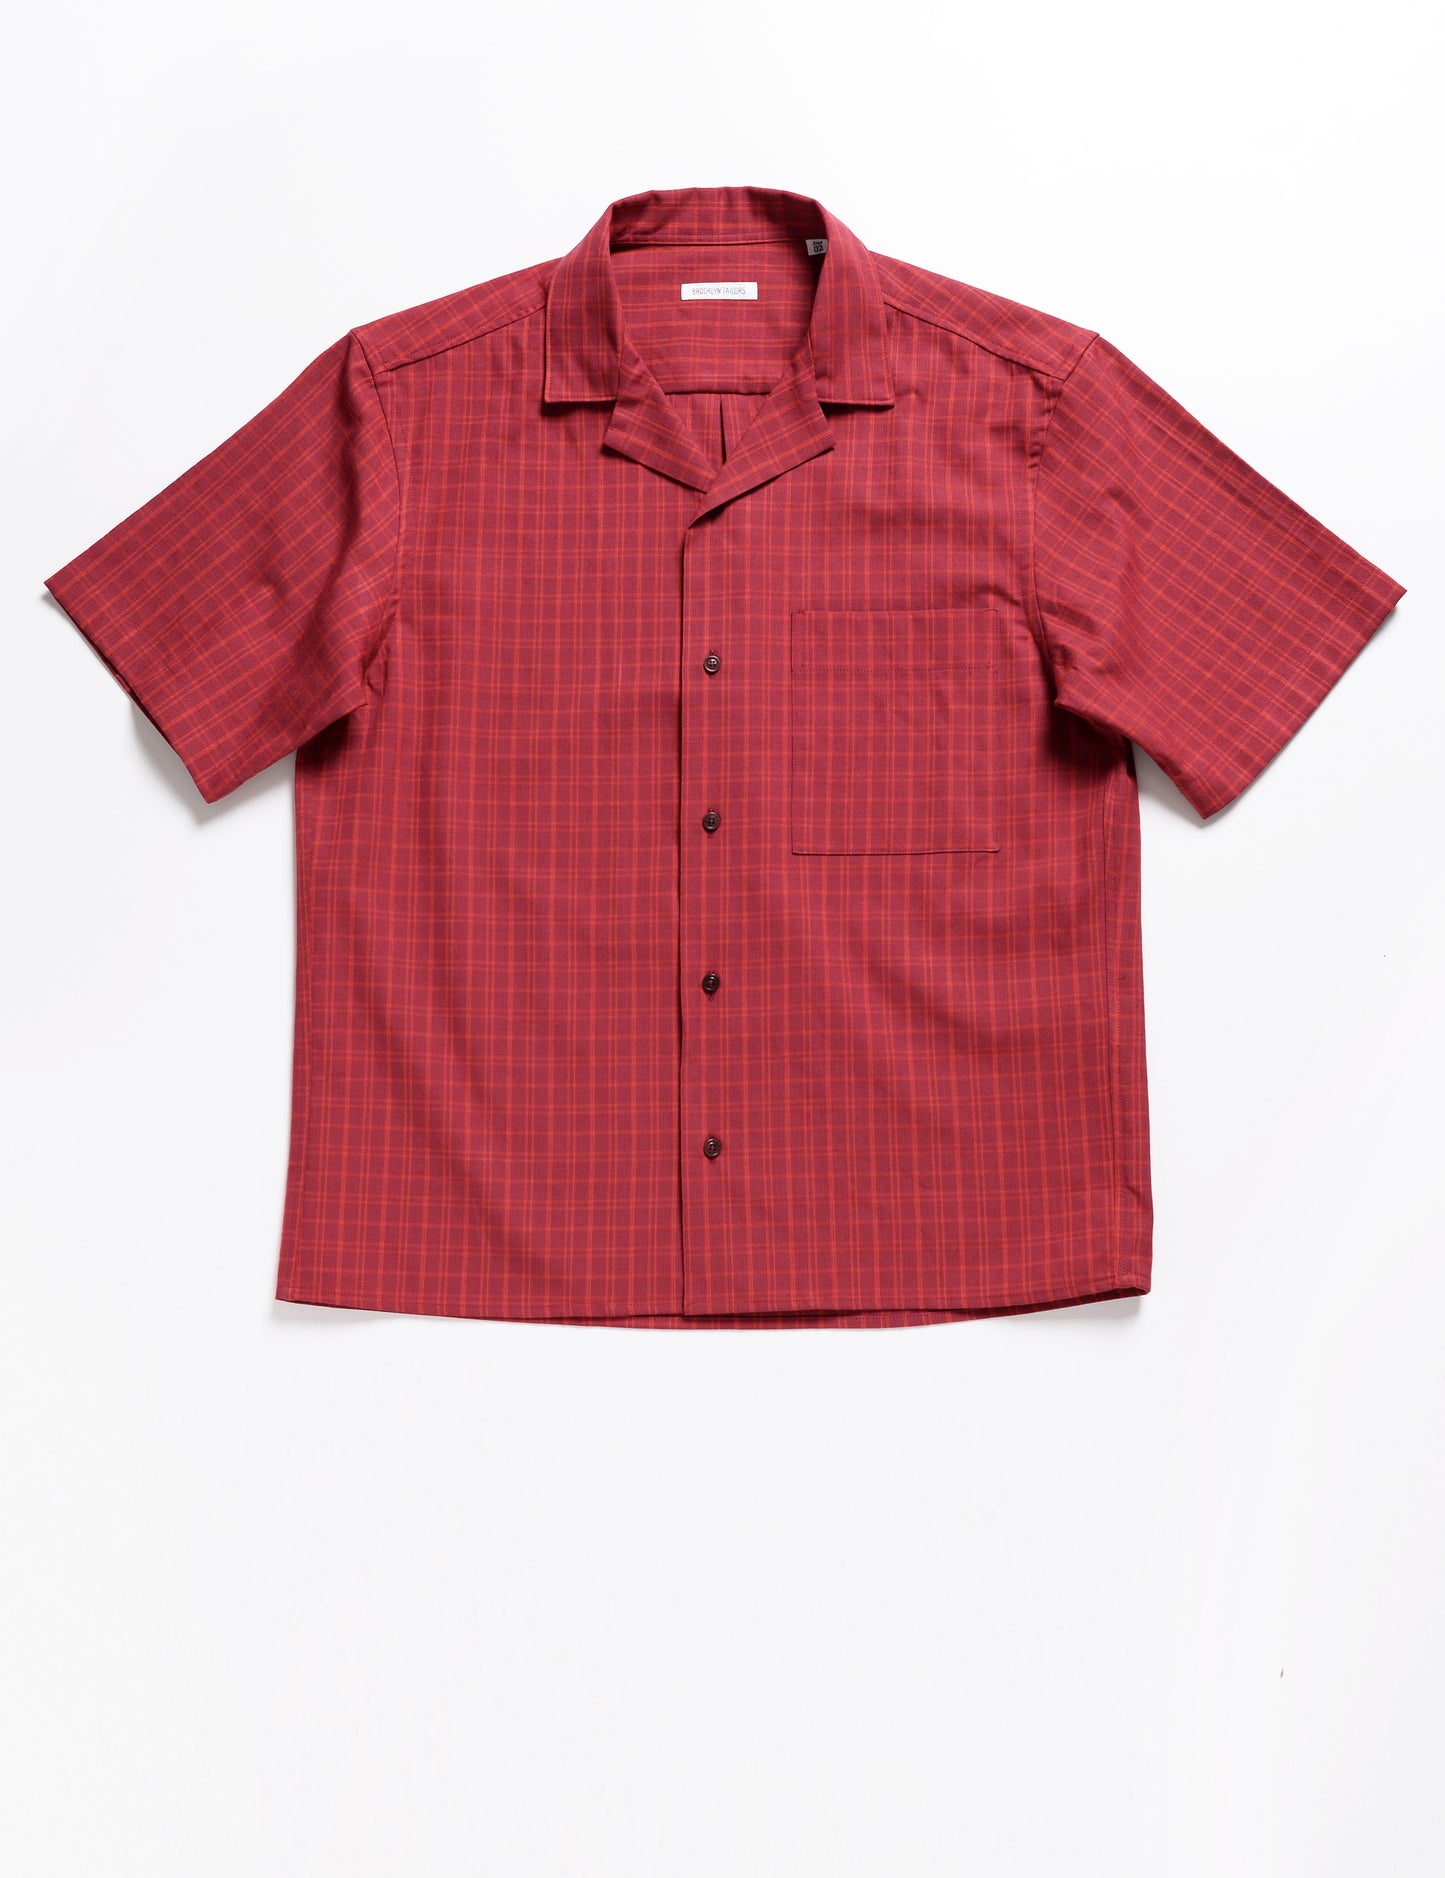 BKT18 Camp Shirt in Roman Check - Siena Red